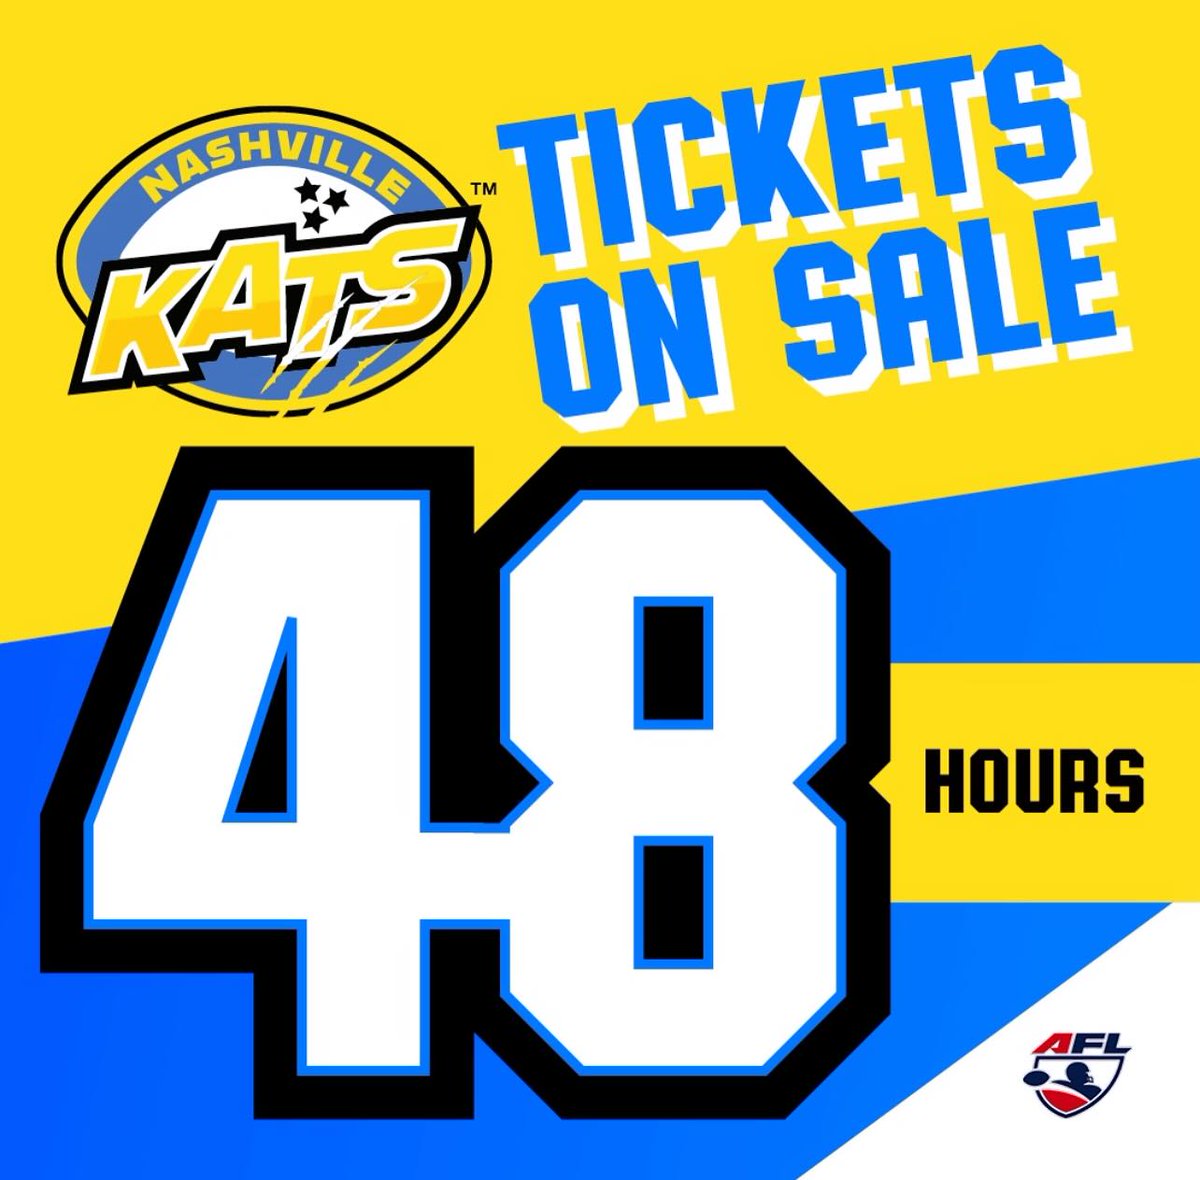 Guess what? That’s right! The Nashville Kats ARE BACK!! ALL HOME GAME tickets go on sale THIS FRIDAY at 10AM CST!! For more information, please visit thenashvillekats.com #ClawsUP